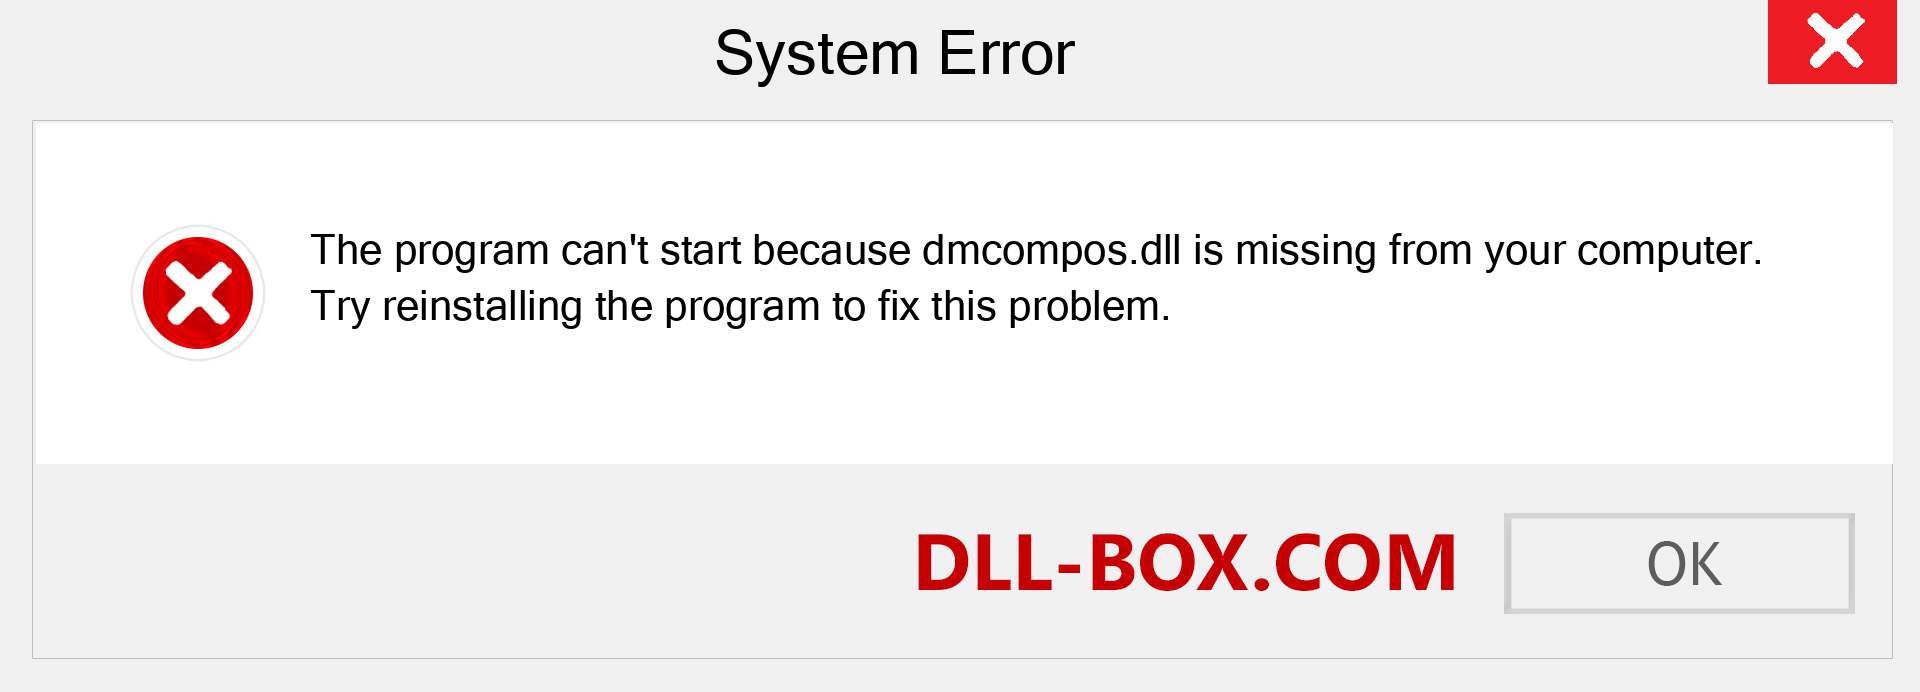  dmcompos.dll file is missing?. Download for Windows 7, 8, 10 - Fix  dmcompos dll Missing Error on Windows, photos, images